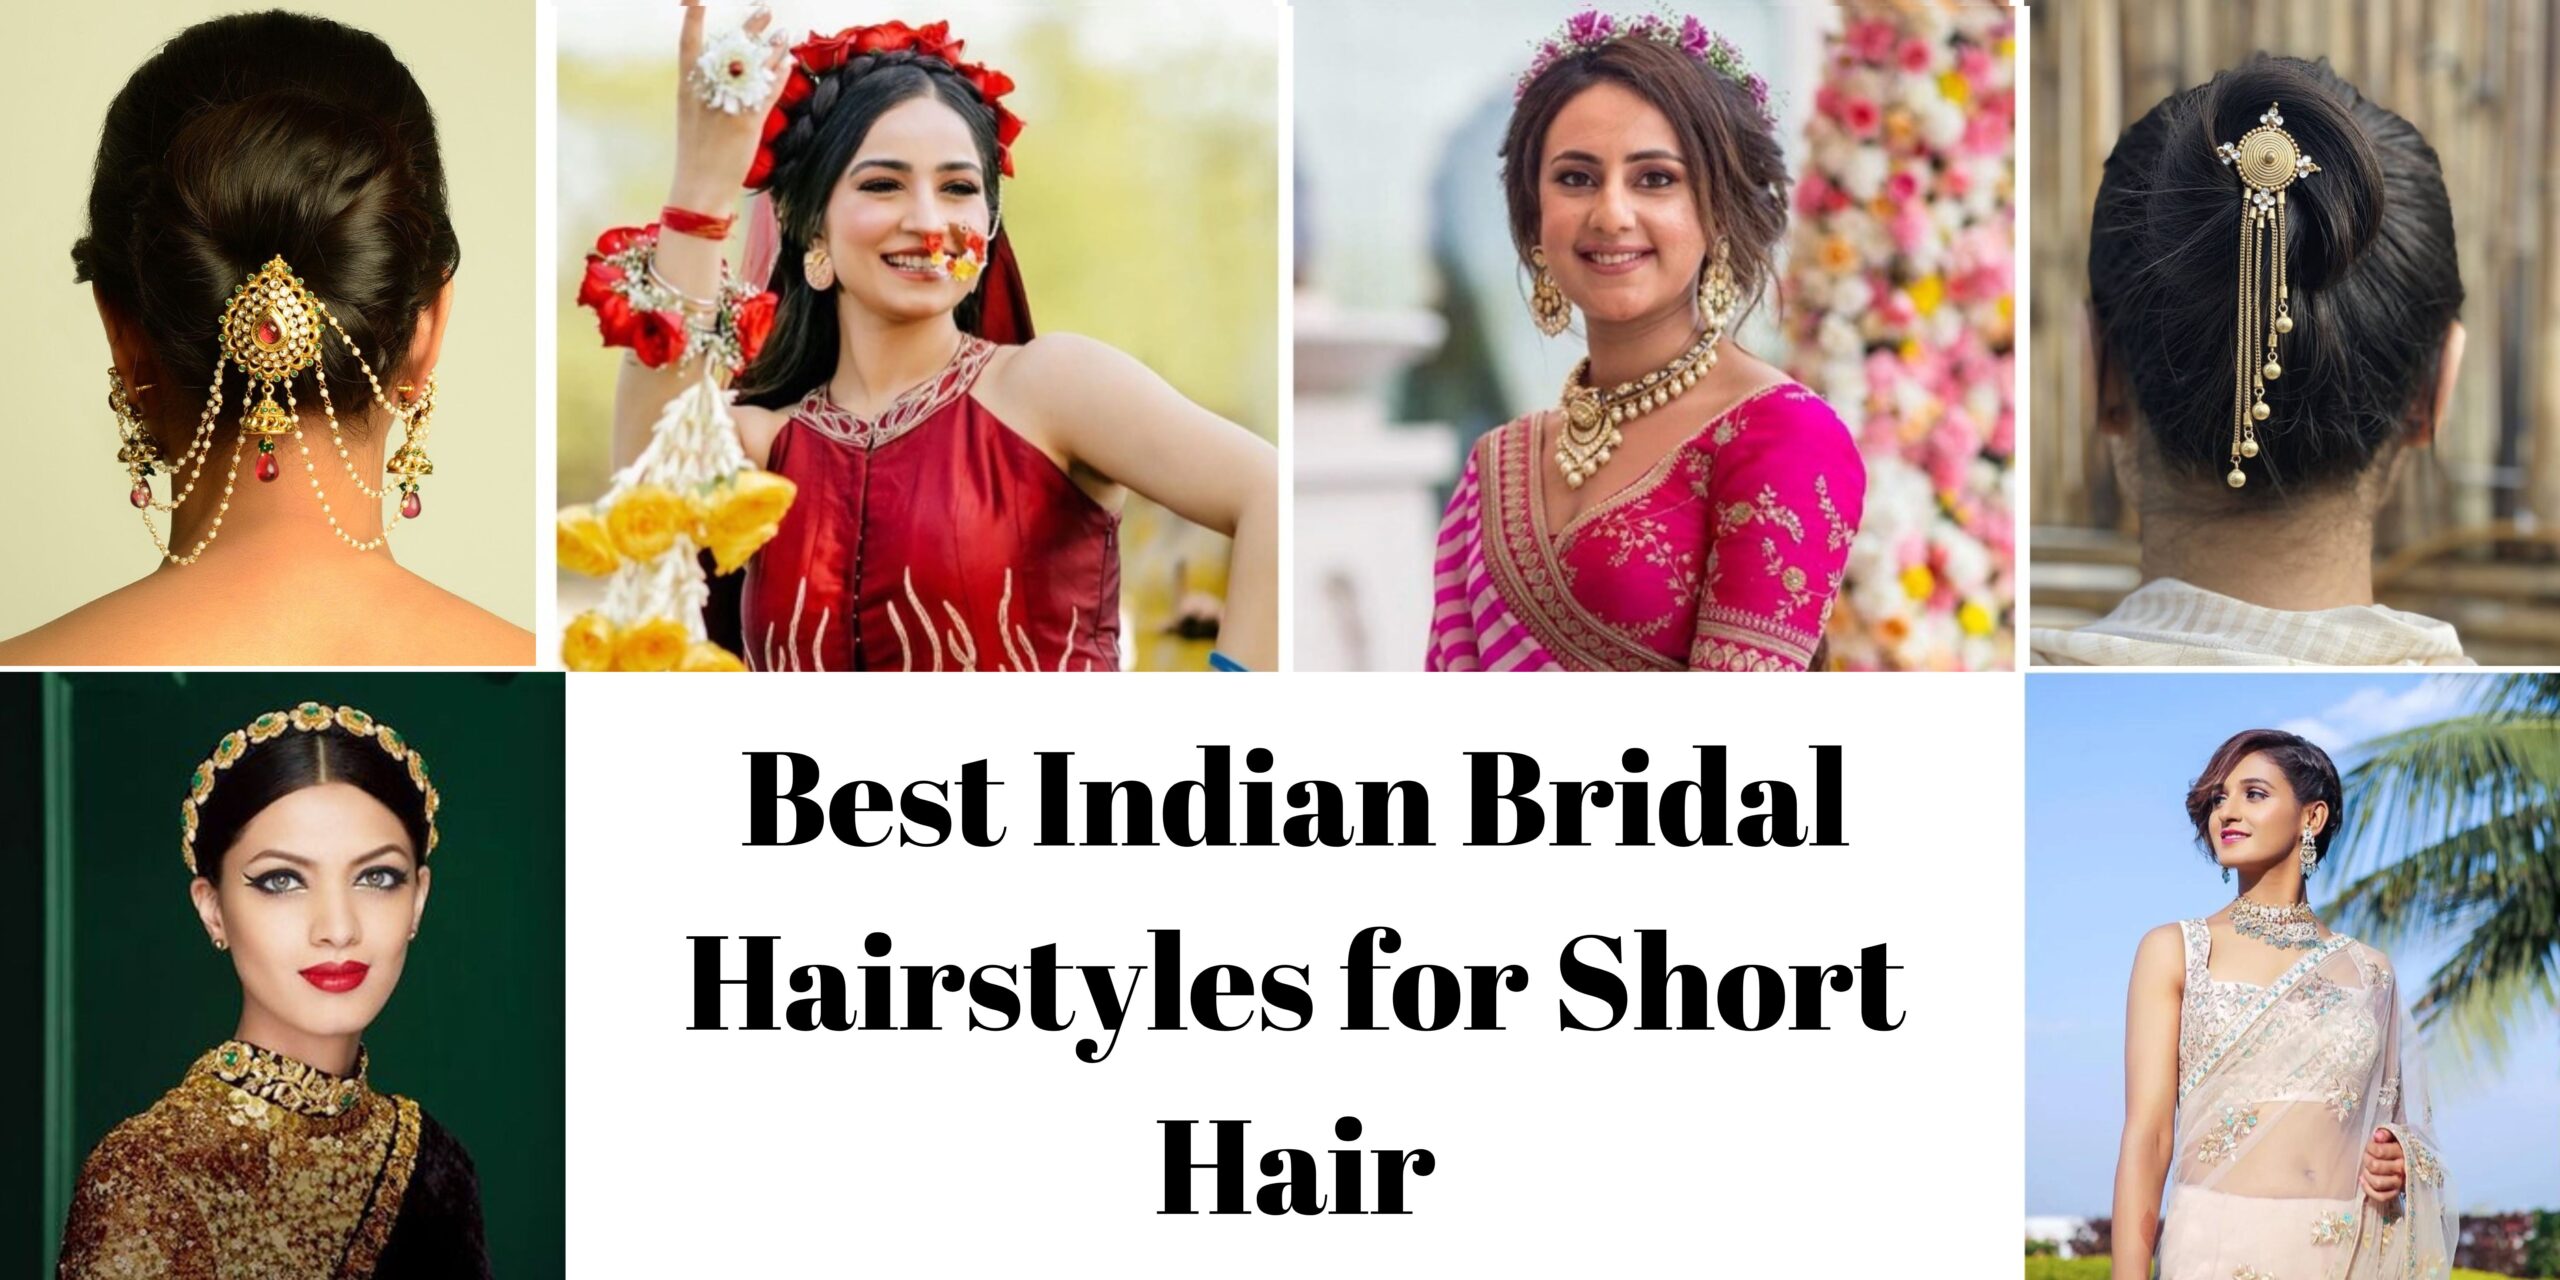 Best Indian Bridal Hairstyles for Short Hair scaled